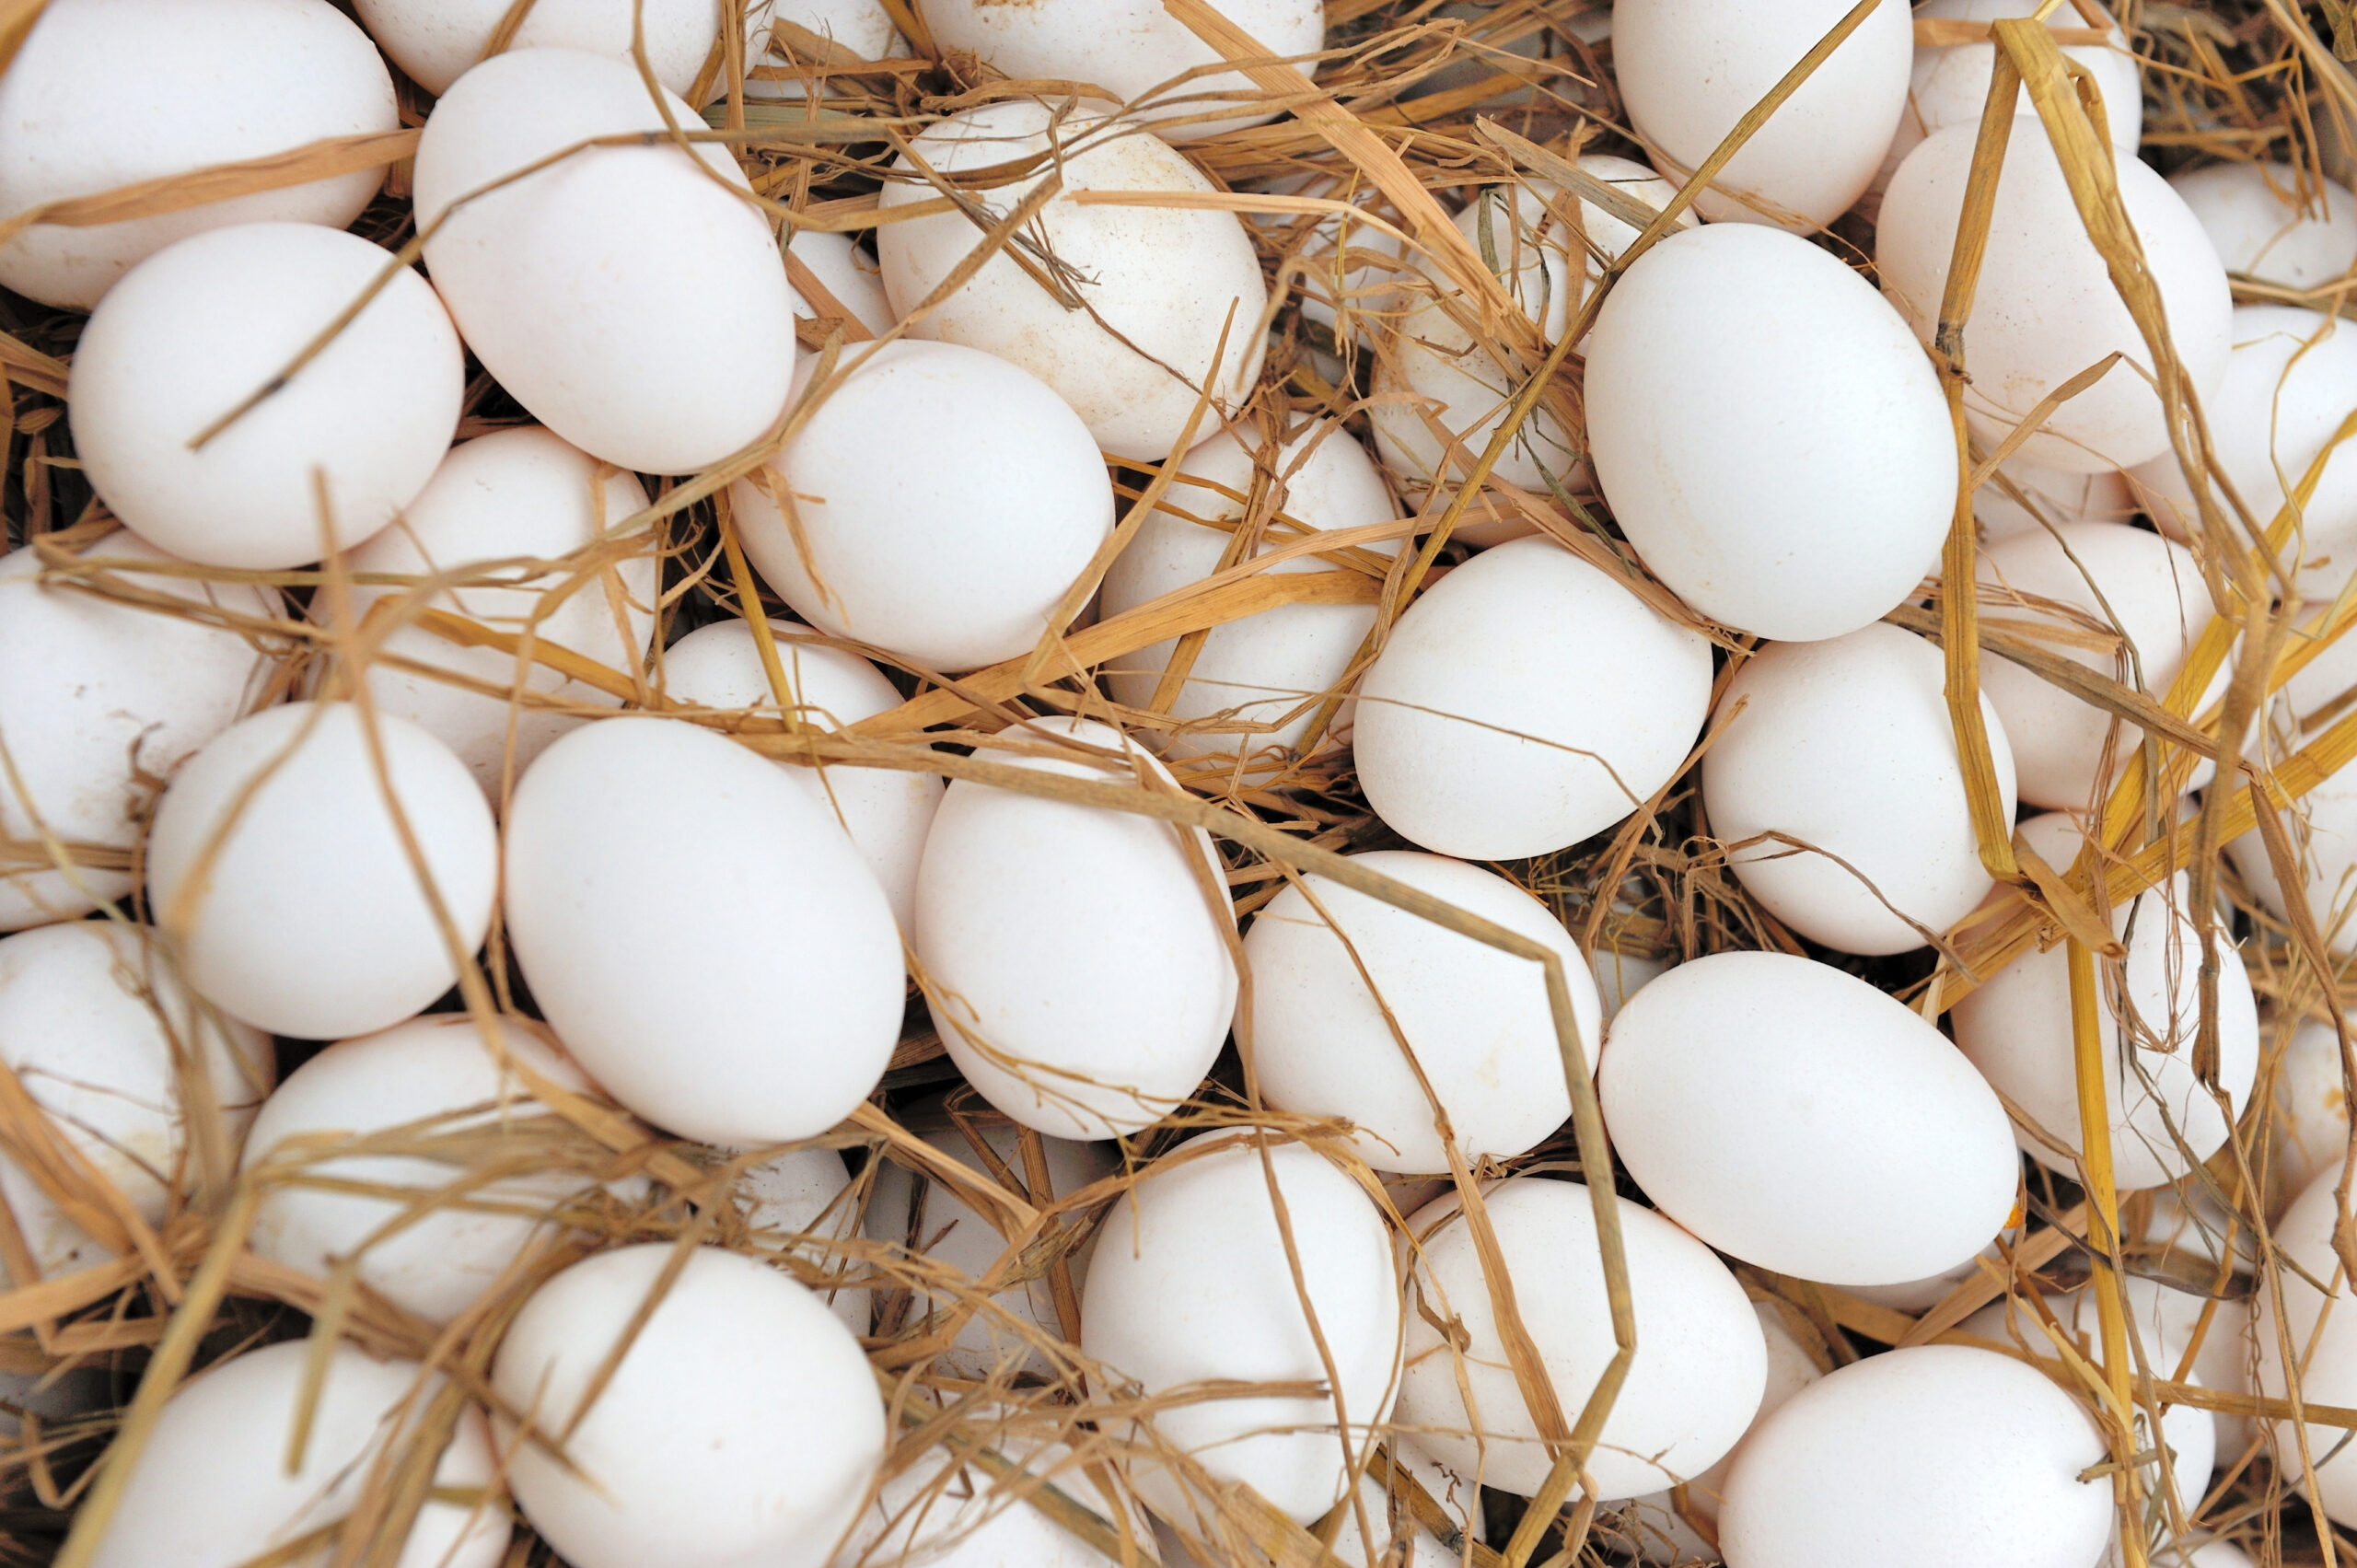 White eggs at hay nest in market